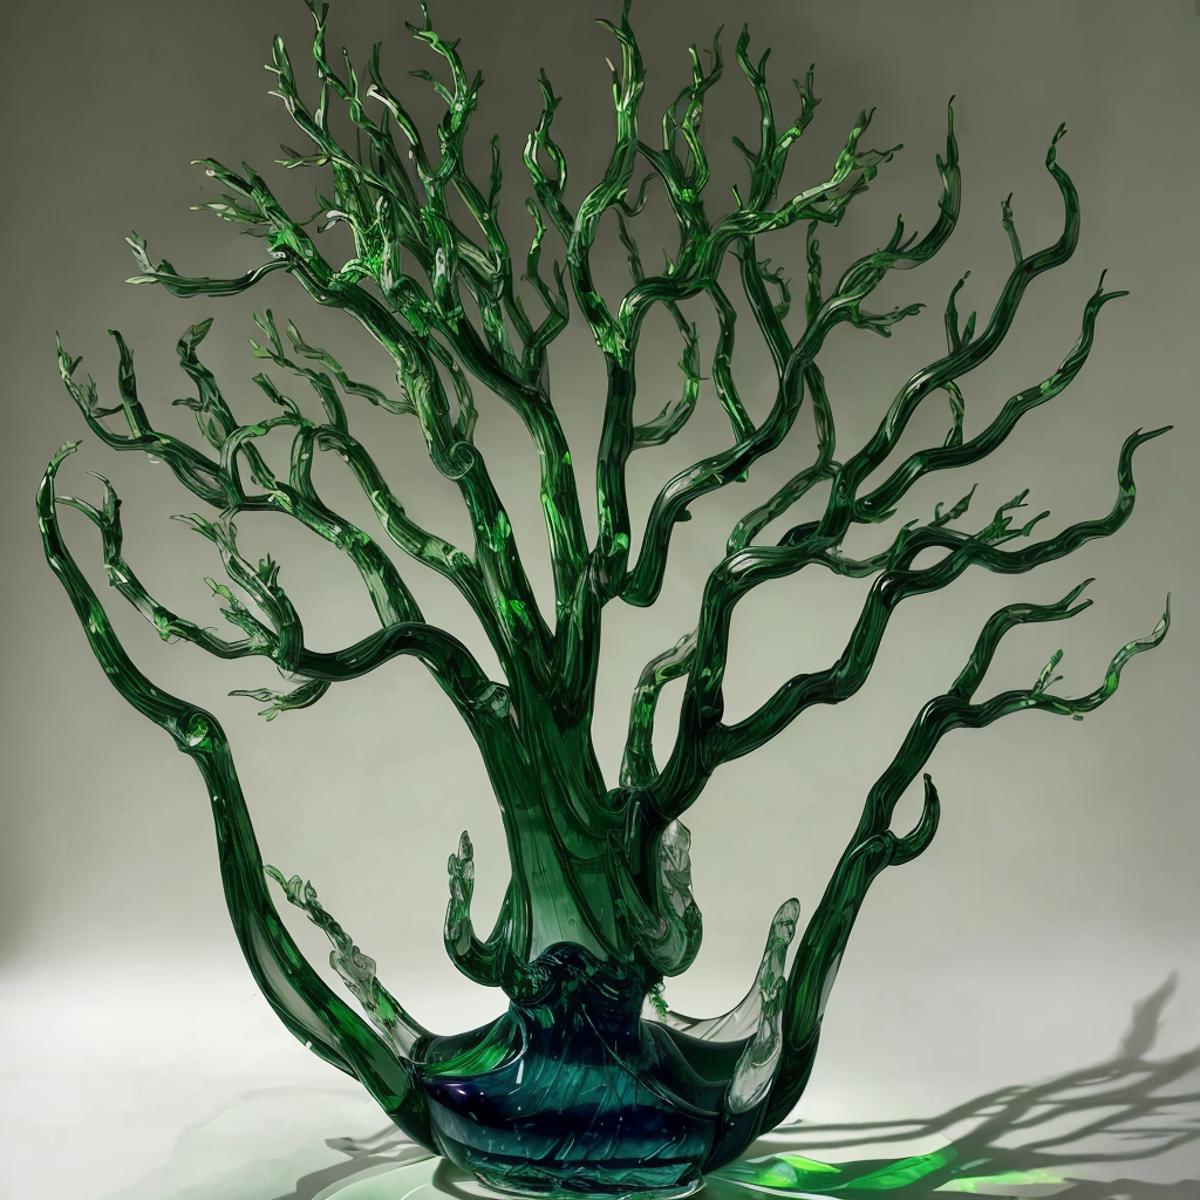 Glass Art and Glass Sculptures image by Jabberwocky207